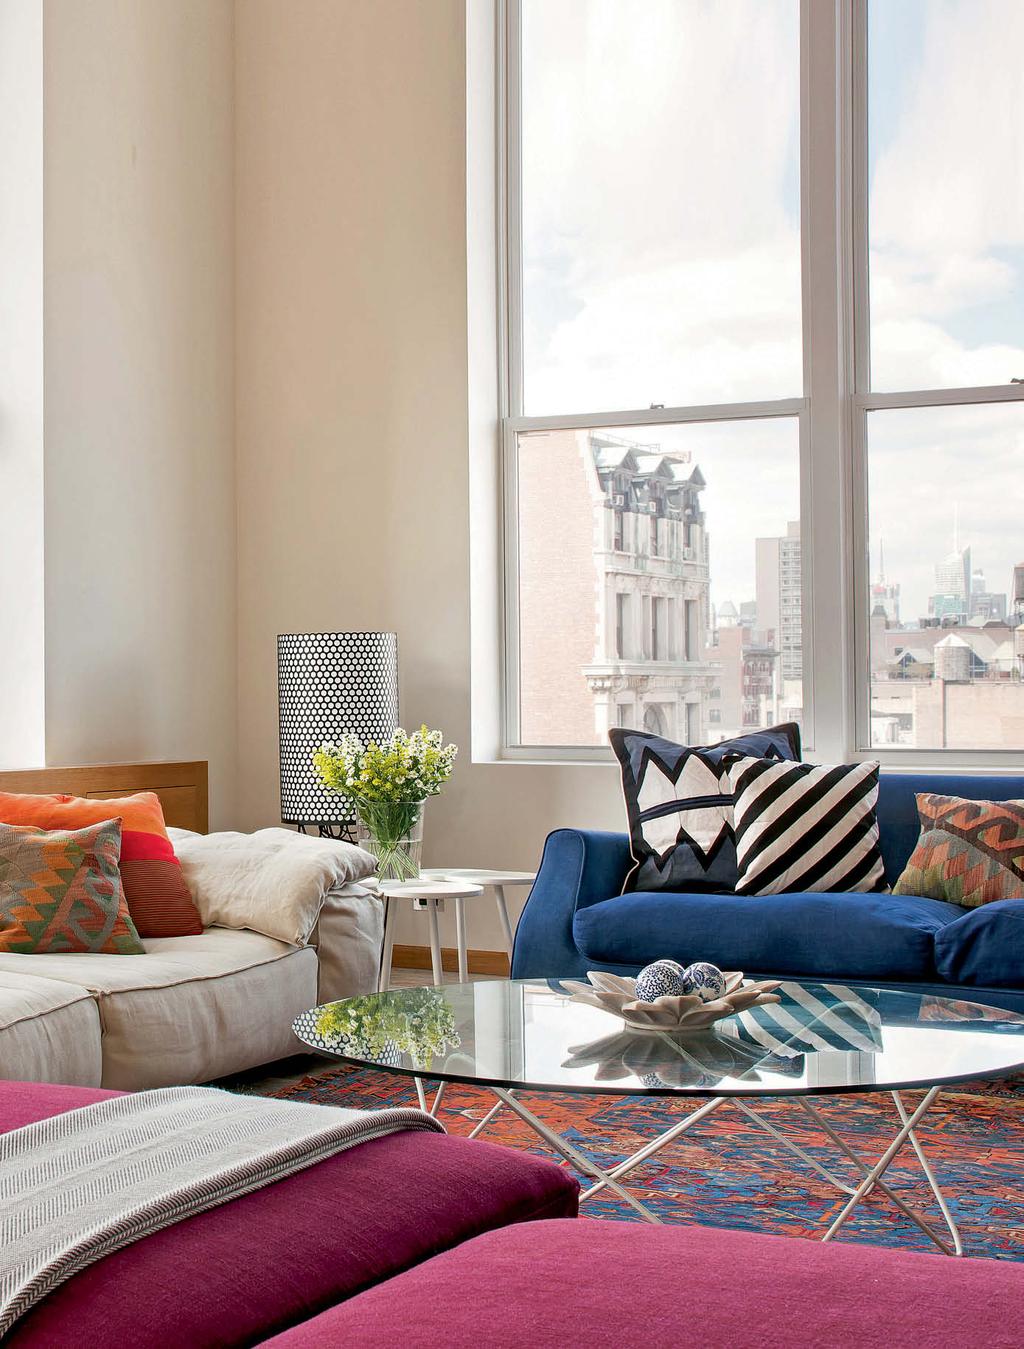 LOCALLY MADE A design entrepreneur s home reflects her passion. COLOUR THERAPY Casamanara reimagines loft living in NYC.